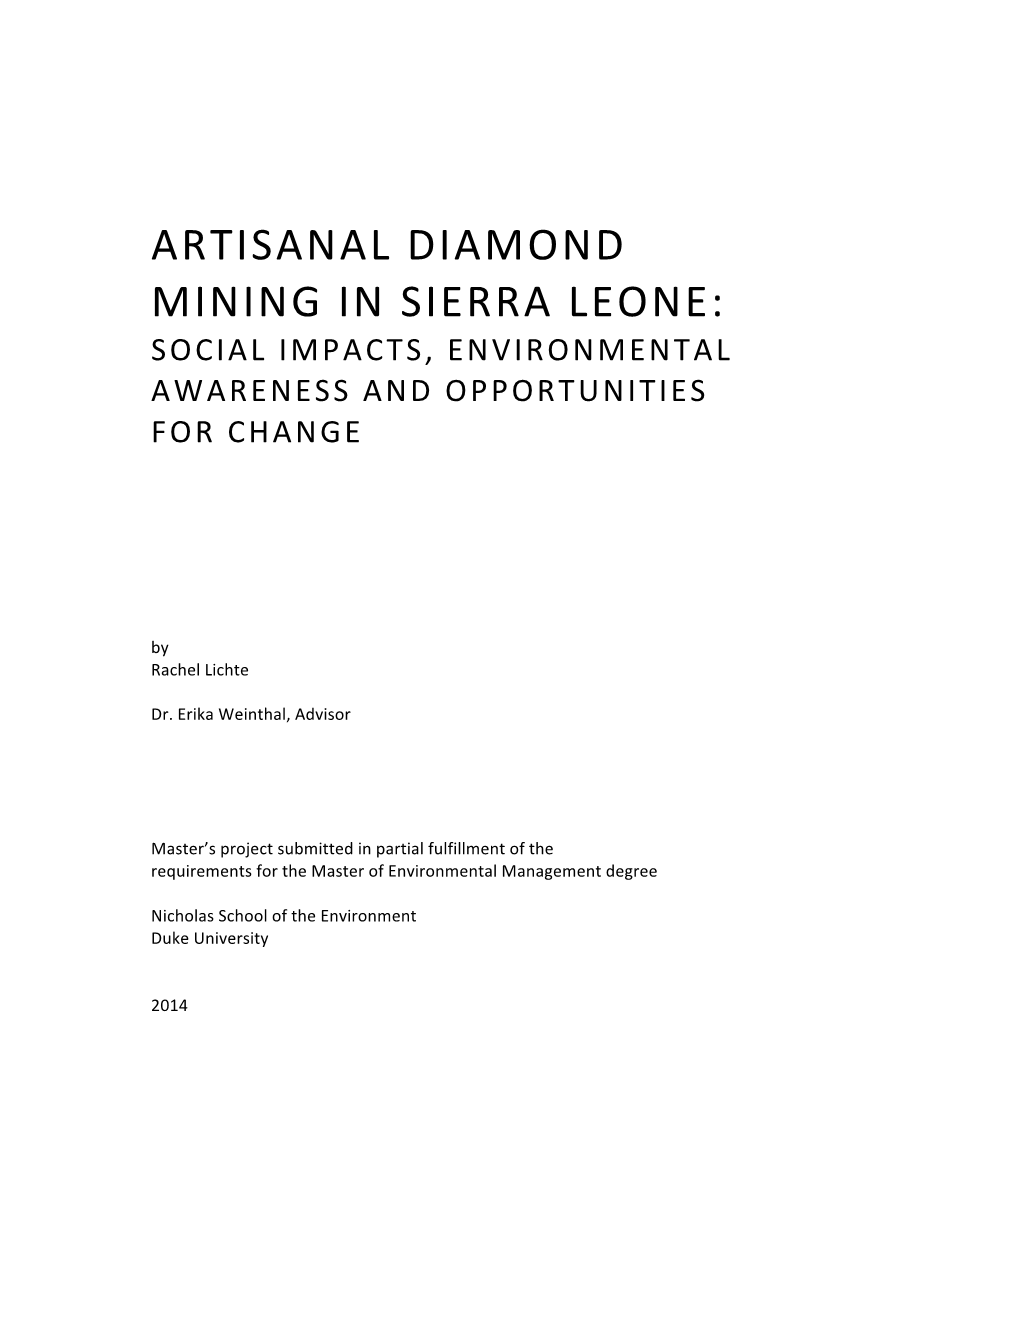 Artisanal Diamond Mining in Sierra Leone: Social Impacts, Environmental Awareness and Opportunities for Change